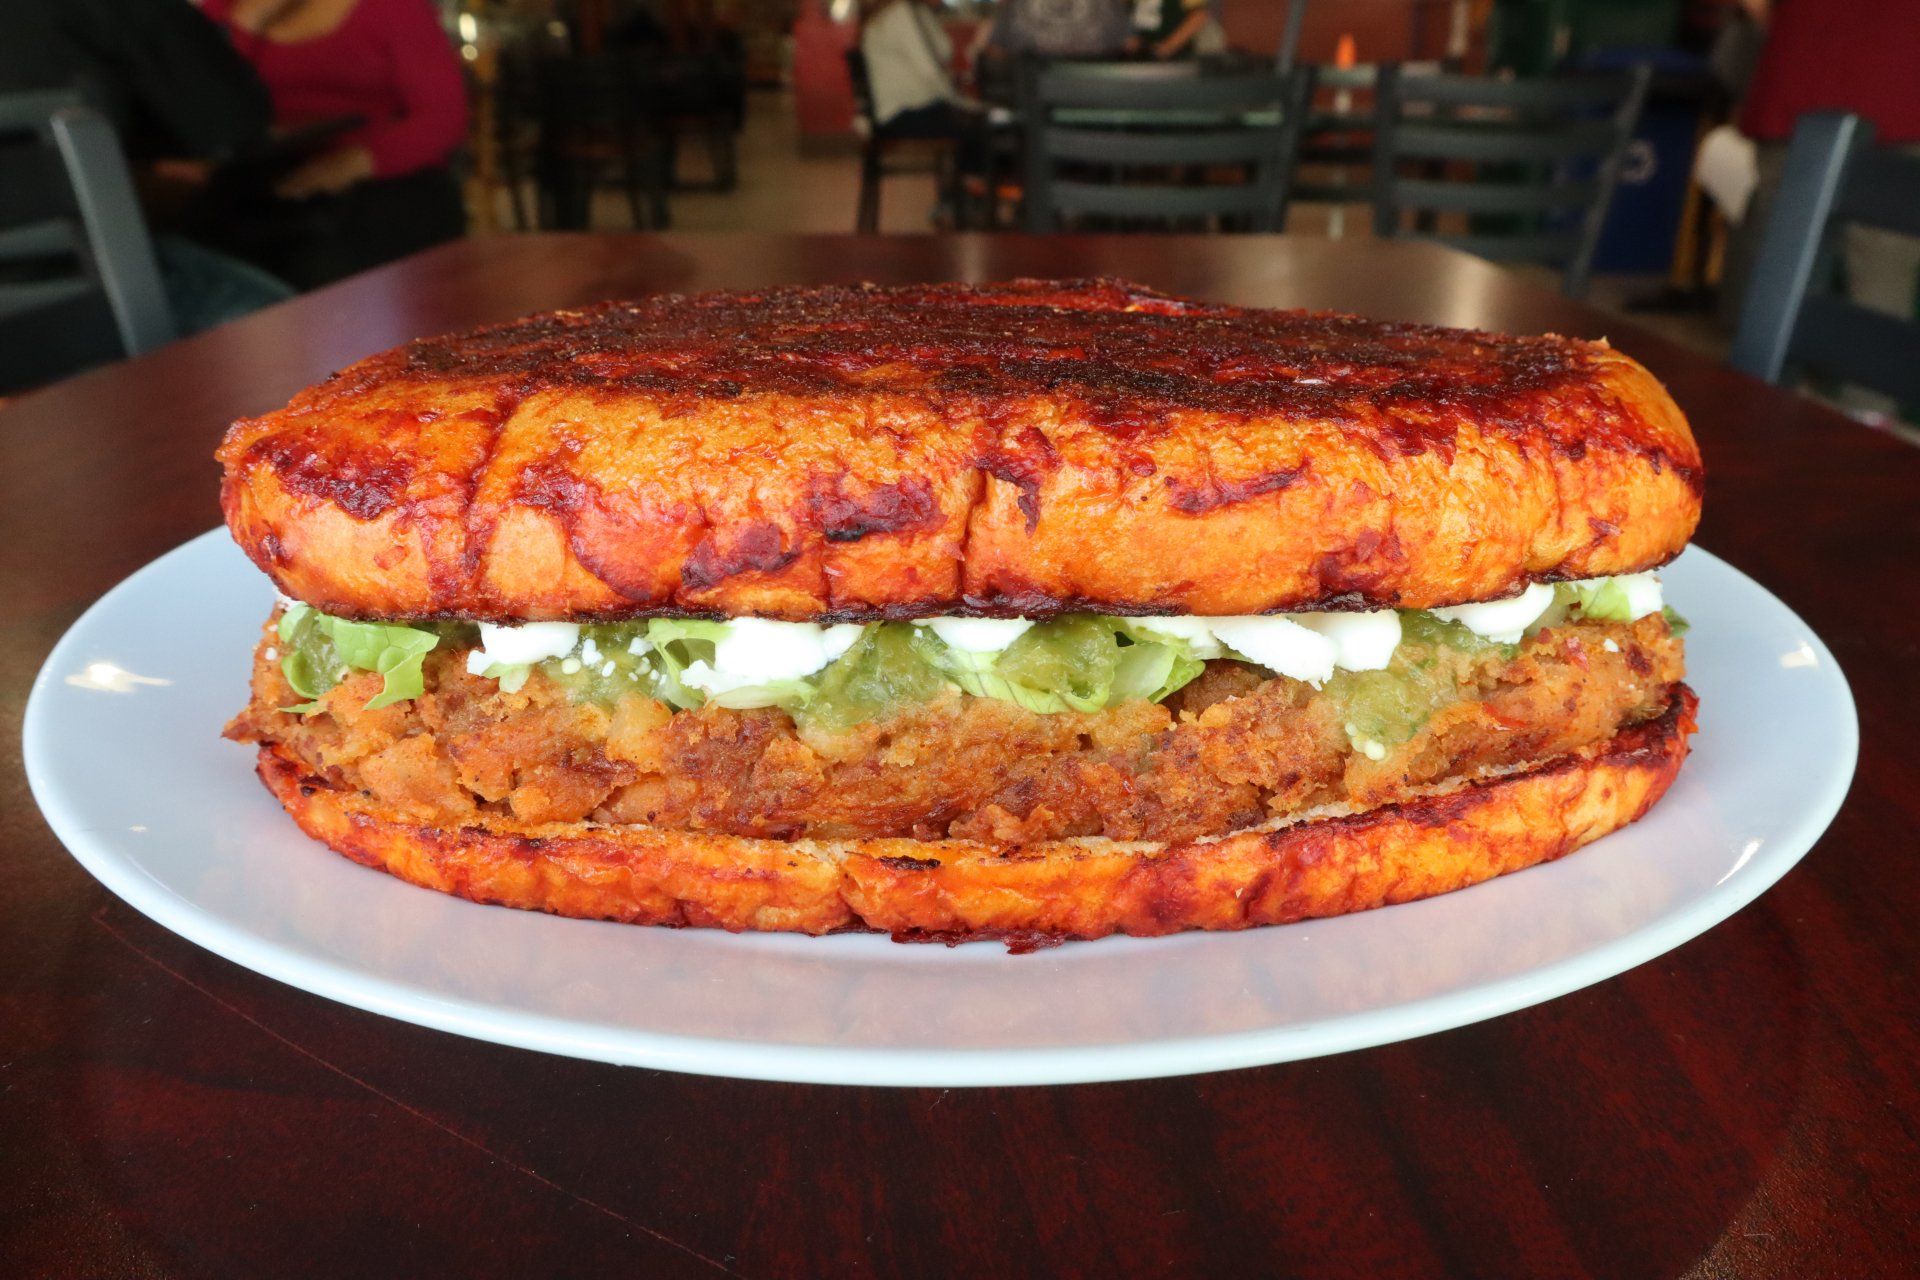 A massive torta, the bread colored by anchiote stuffed with meat, guacamole, and crema